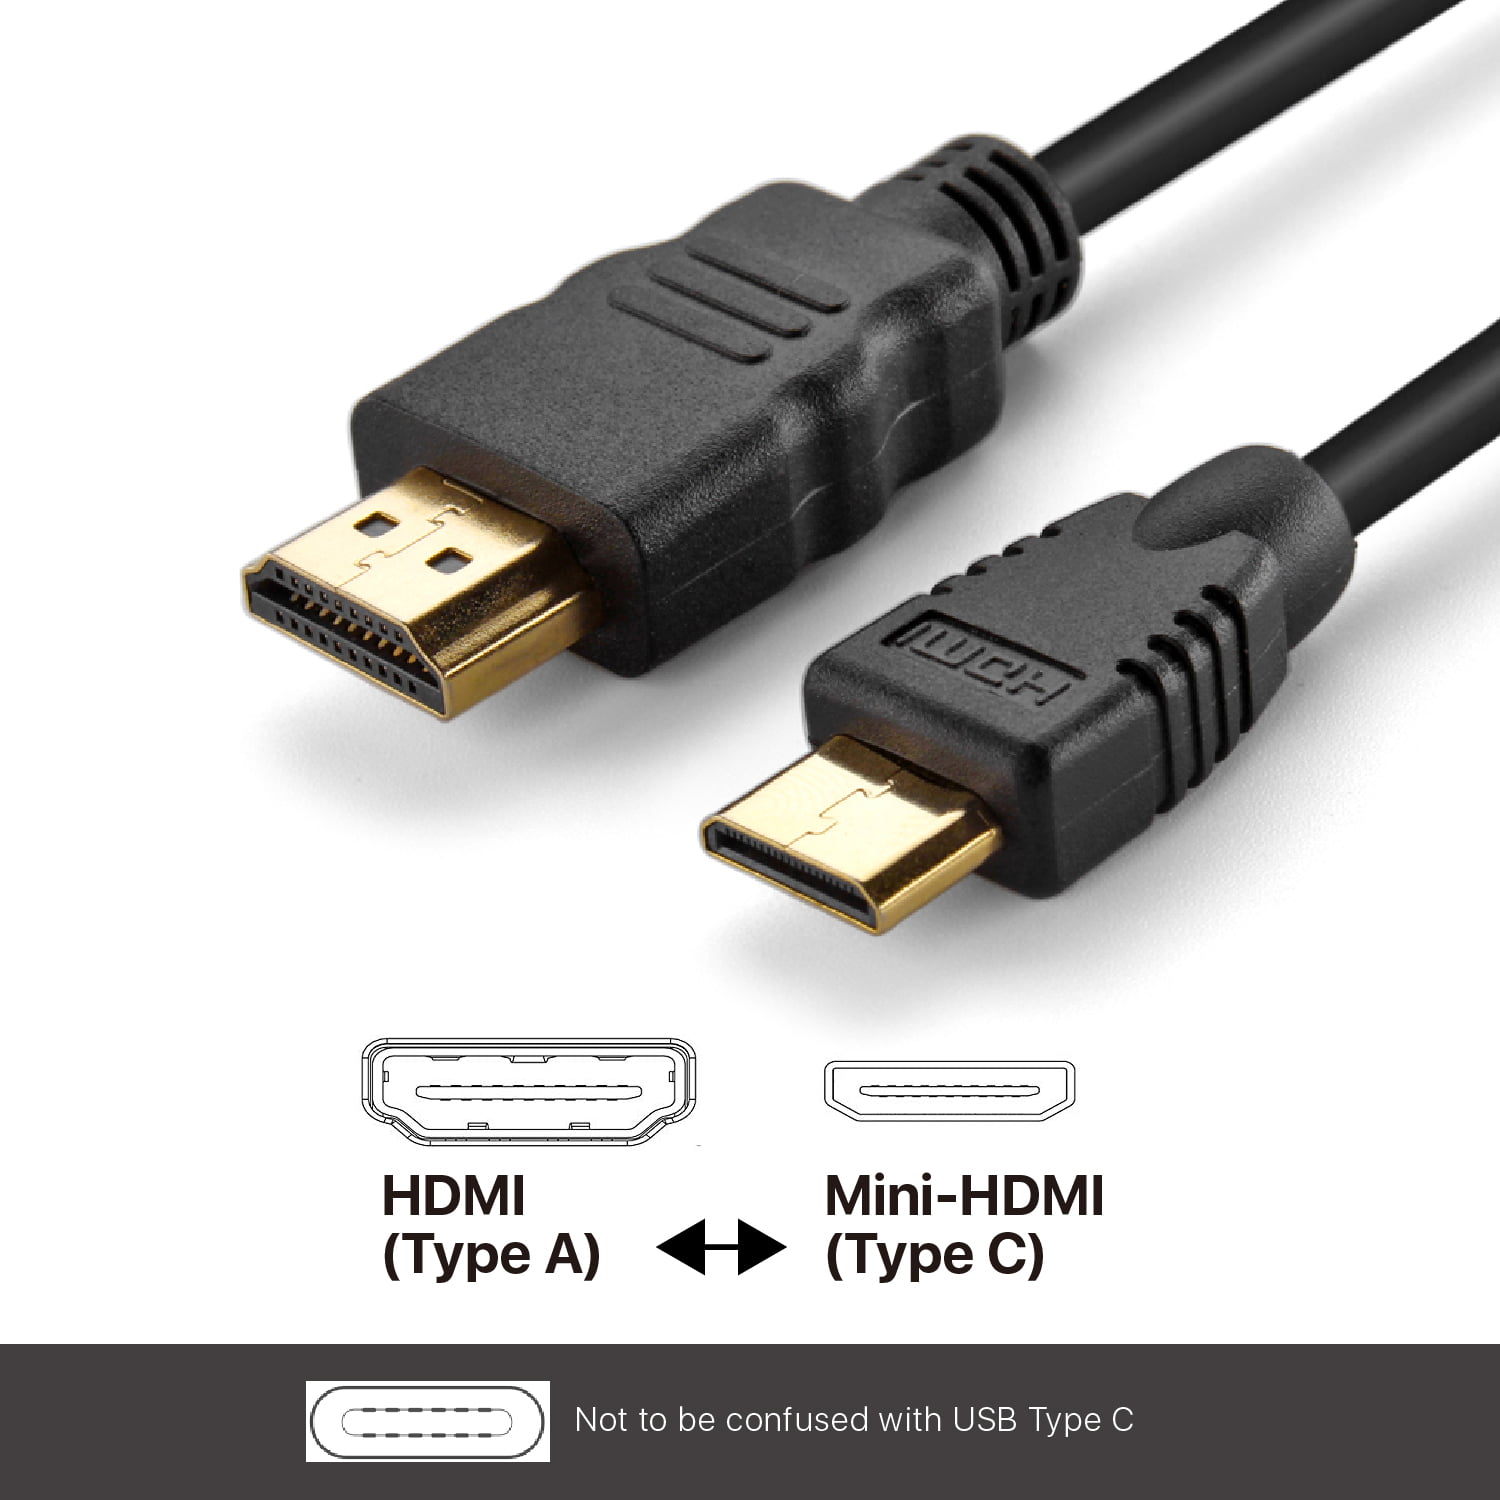 Products Mini HDMI (Type C) to HDMI (Type A) Cable (10 Feet) - High Speed Video Audio AV HDMI Male C to Male a Converter Adaptor Cord Supports